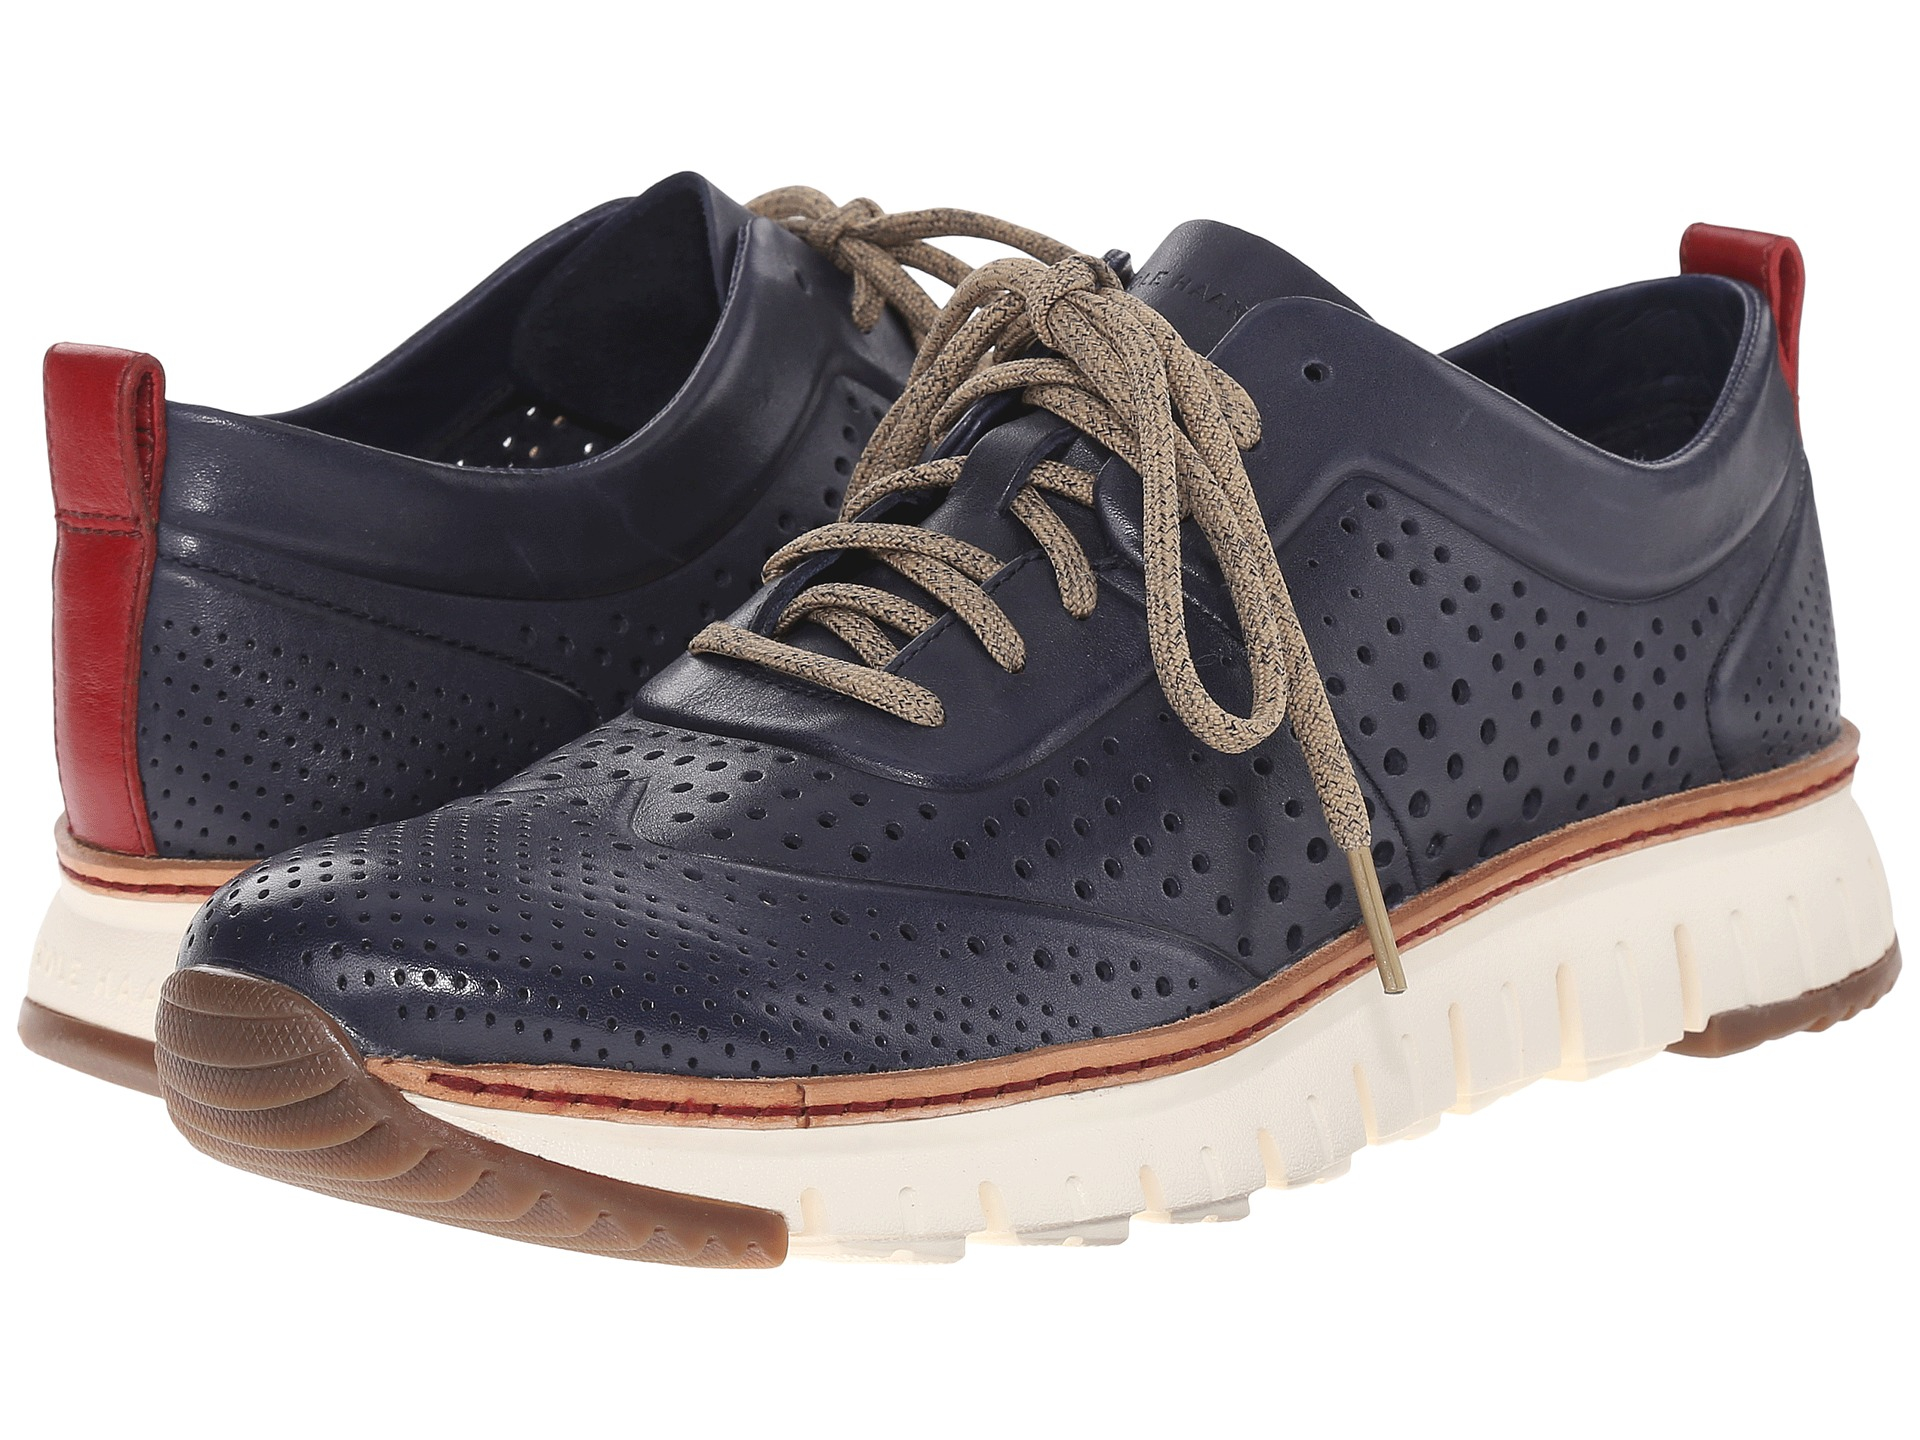 Cole Haan Leather Zerogrand Perforated Sneakers in Blue for Men - Lyst